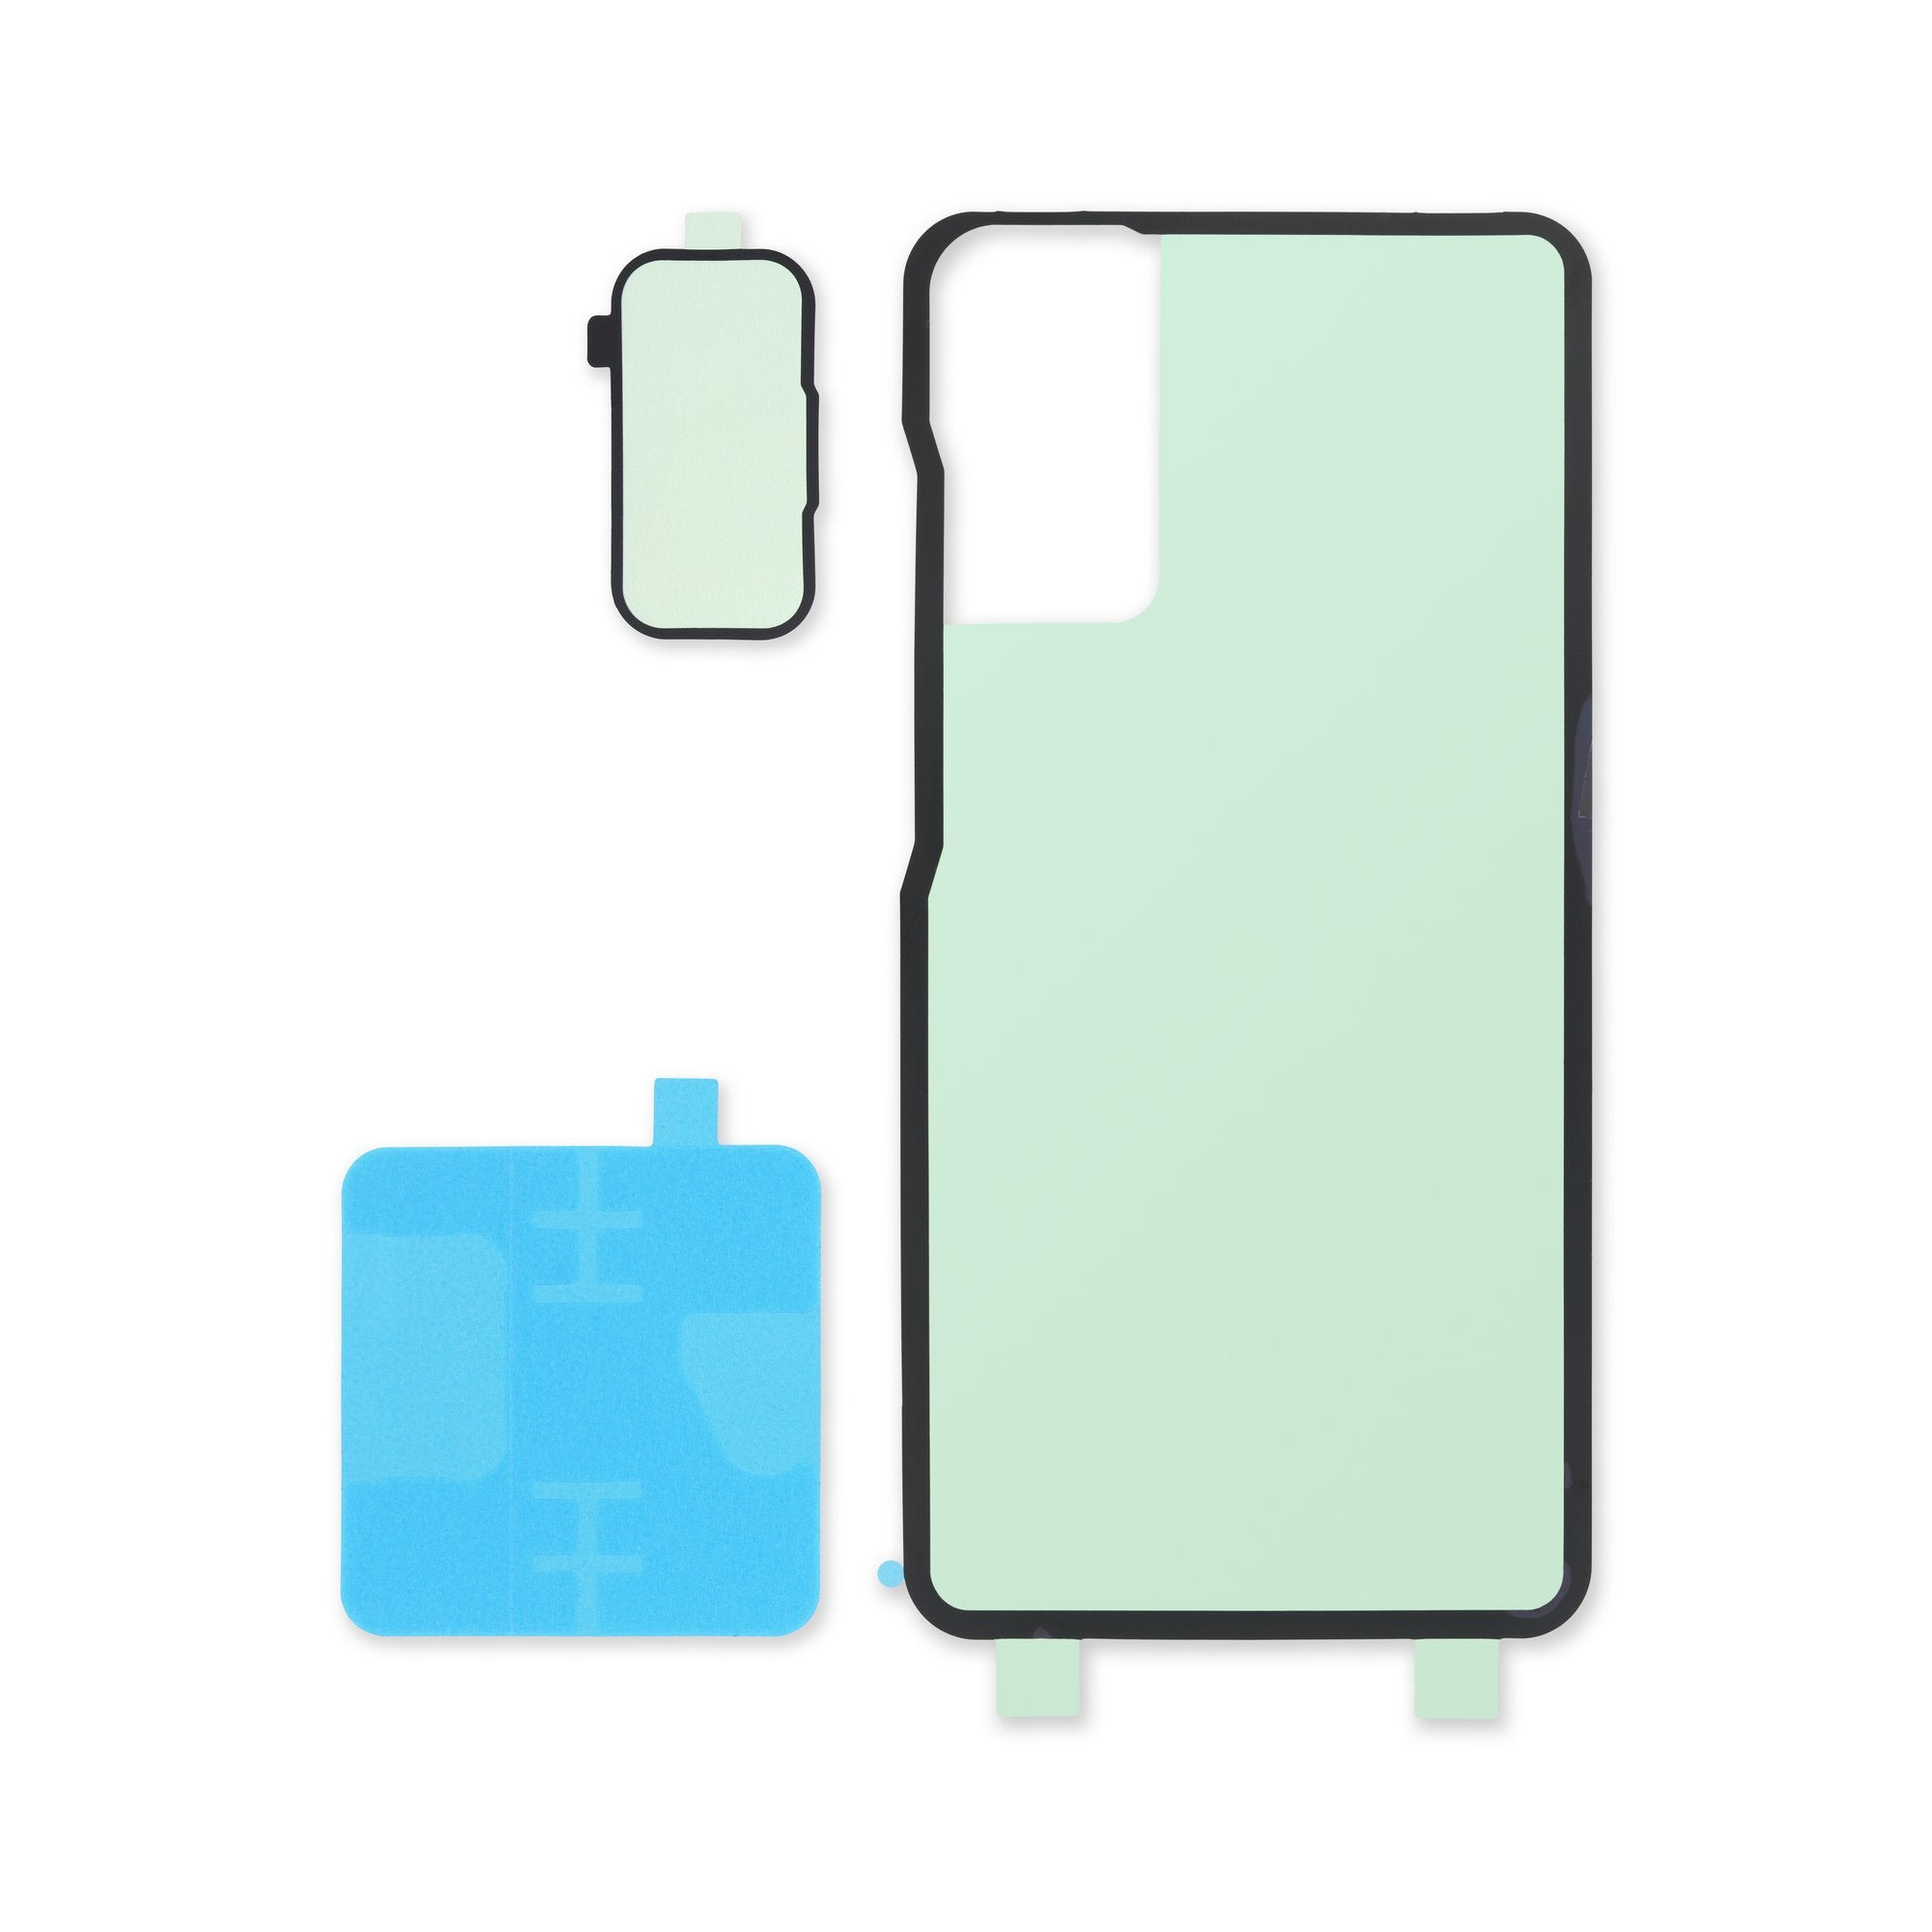 Galaxy S20 FE Rear Cover Adhesive New